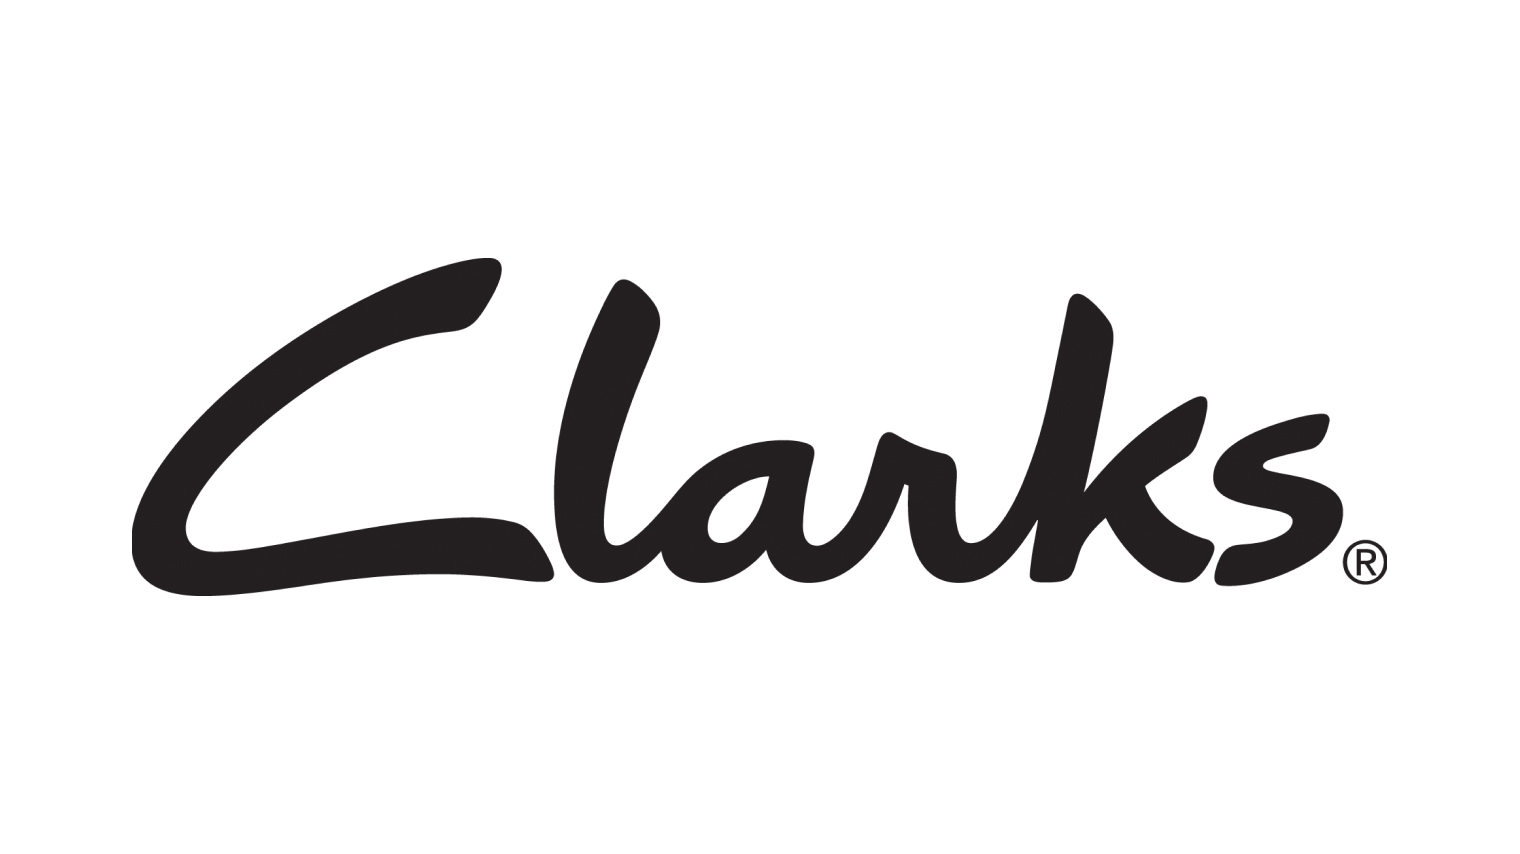 clarks shoes promo code 2019